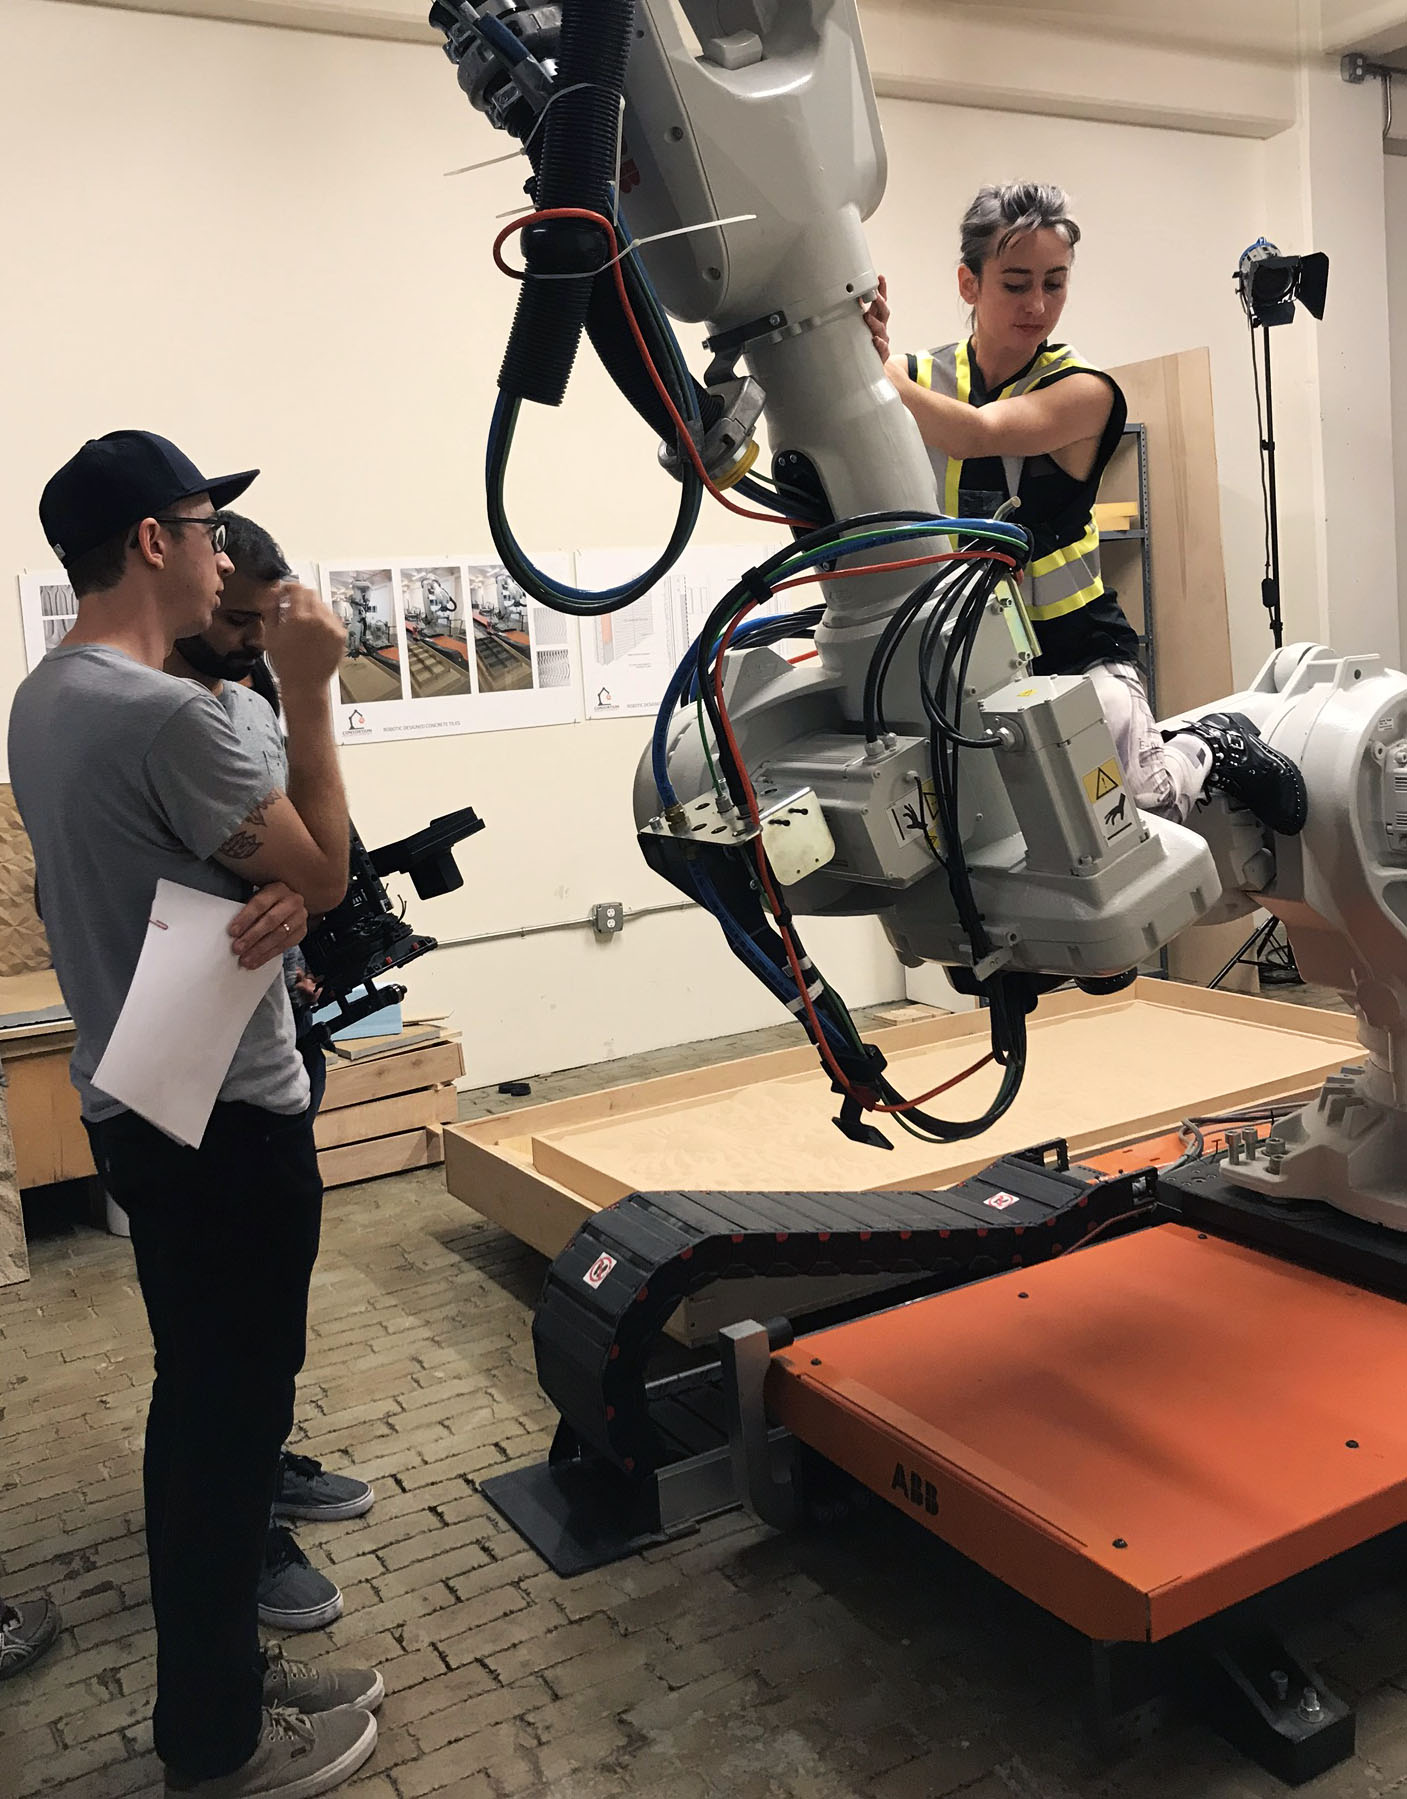 A film crew working with an industrial robot